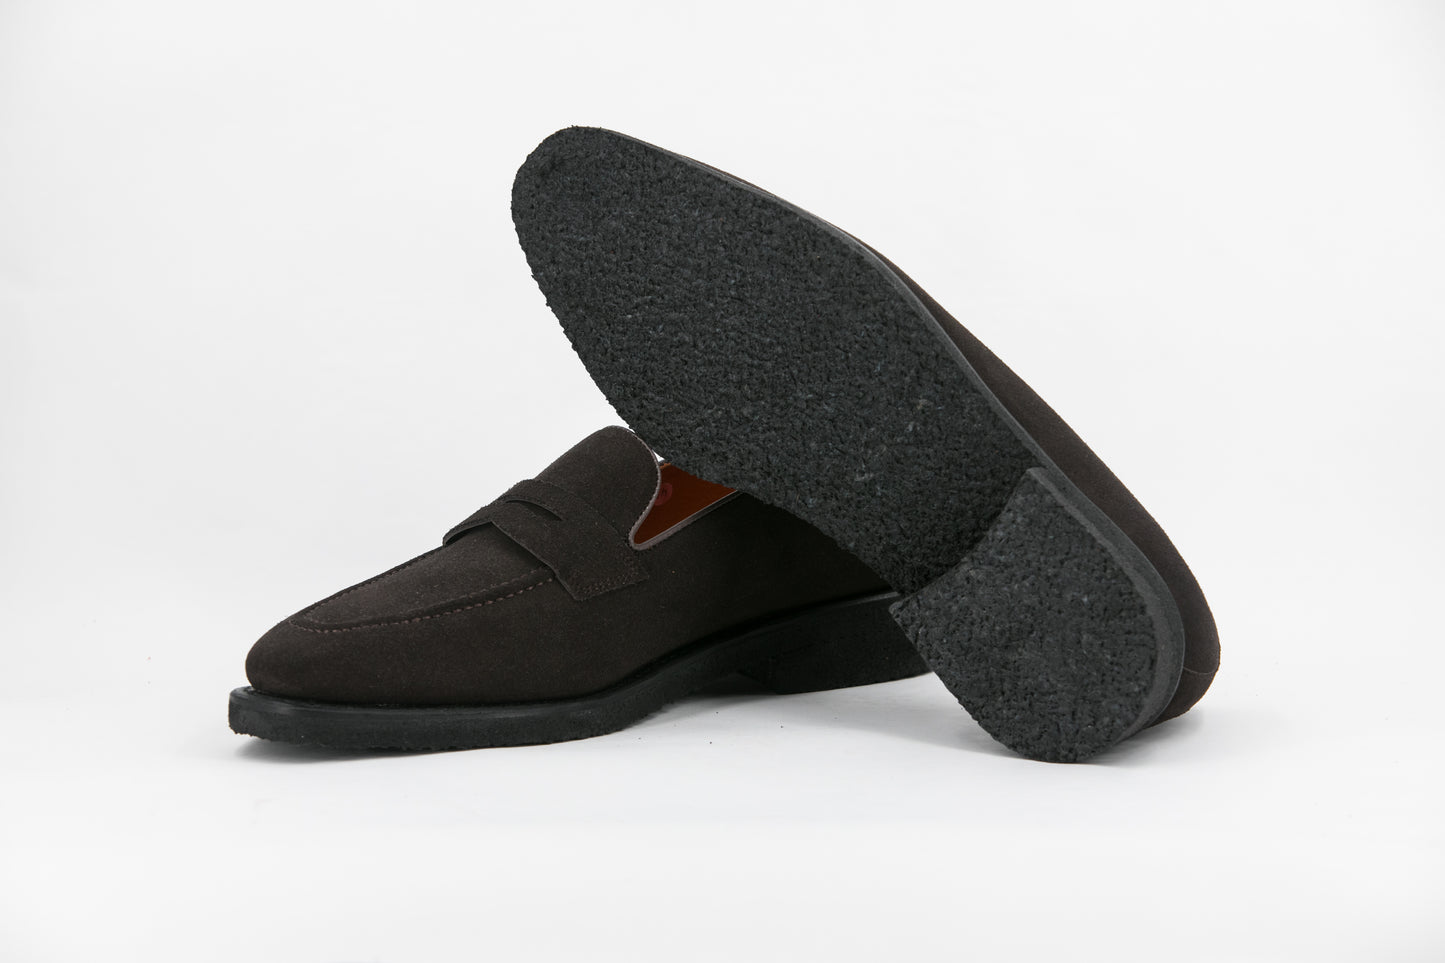 LOAFER SAVILE SUEDE BROWN CREPE SOLE